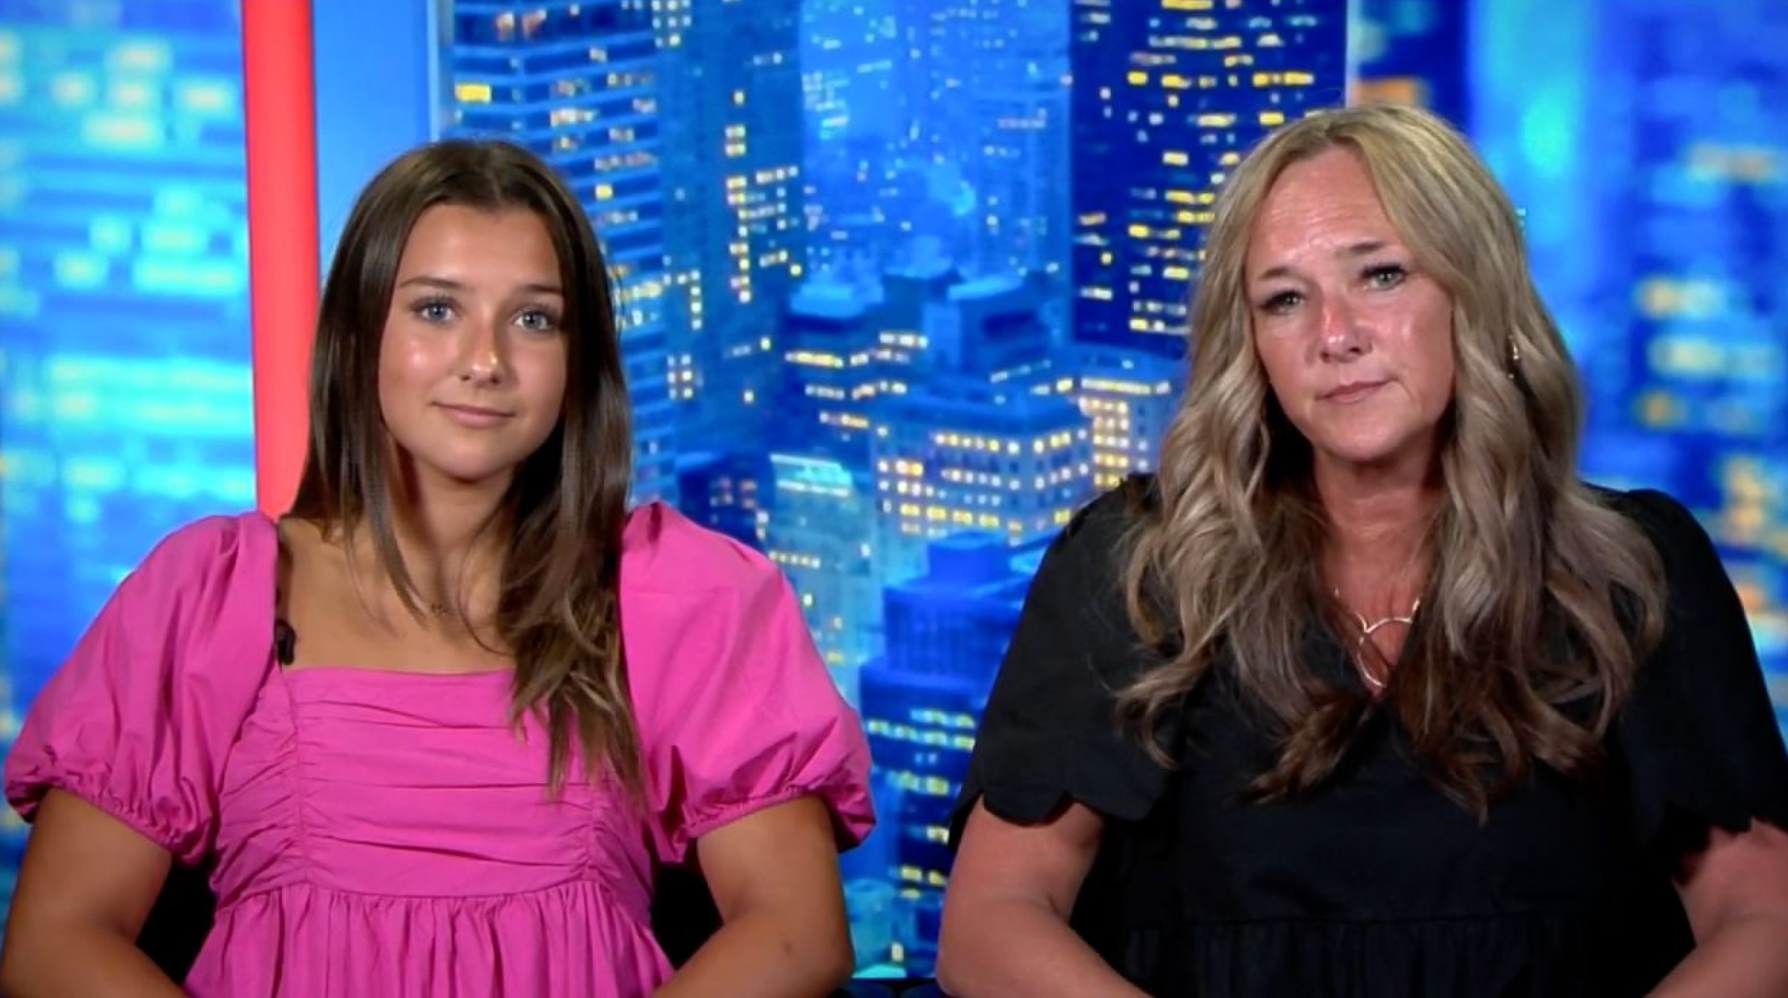 Elliston Berry (left) and her mother Anna McAdams (right) say federal protections are needed to protect victims of deep-fake porn. Berry was just 14 when a classmate distributed AI-generated nude images of her last year